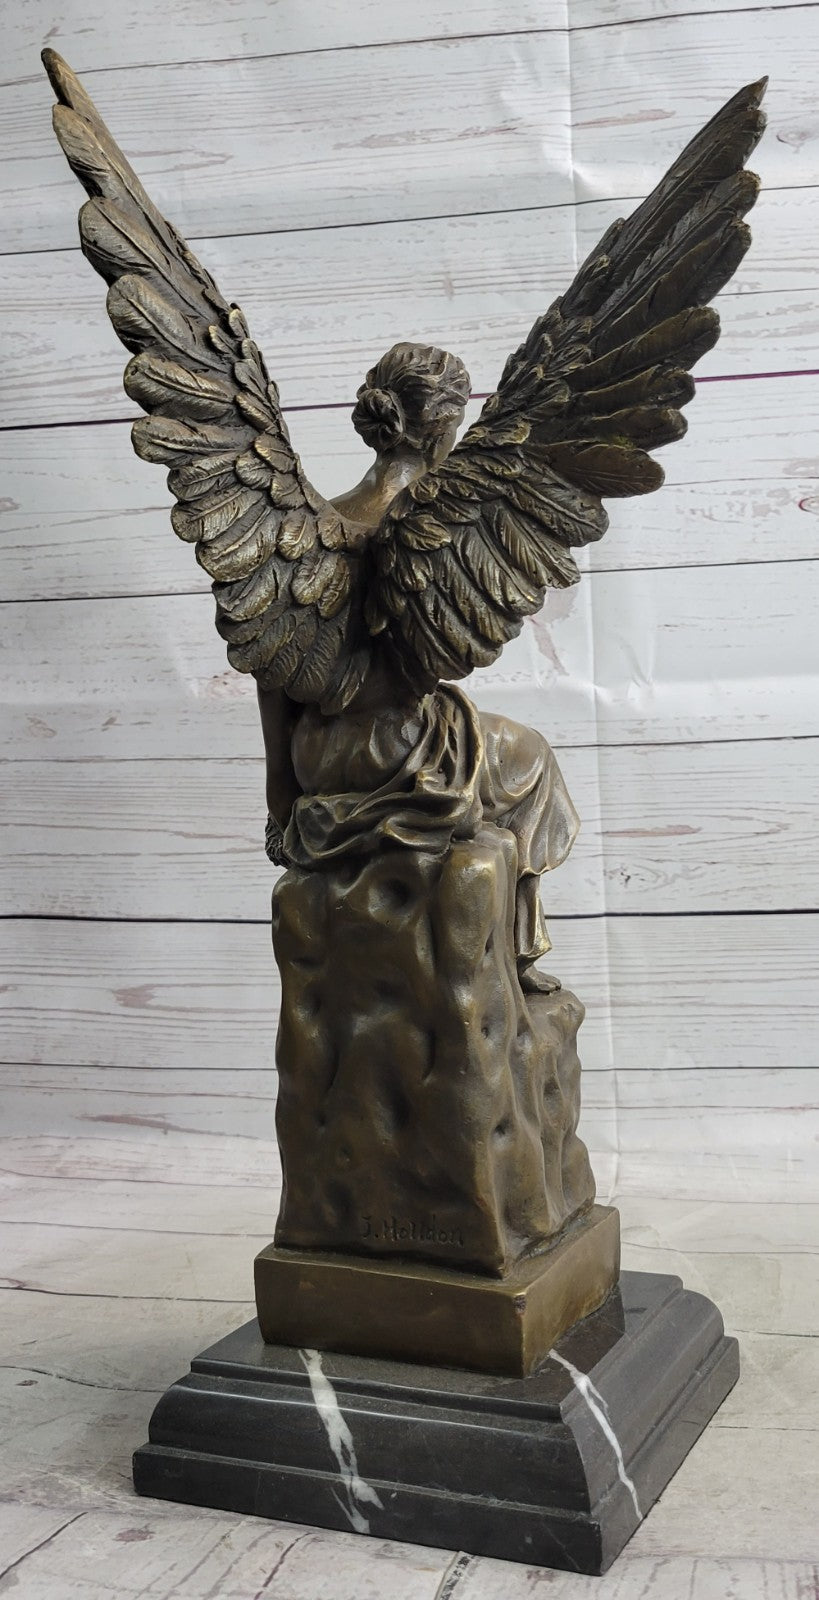 ART Archangels Nike Angel of Victory Mythical Bronze Sculpture Statue Decor GIFT